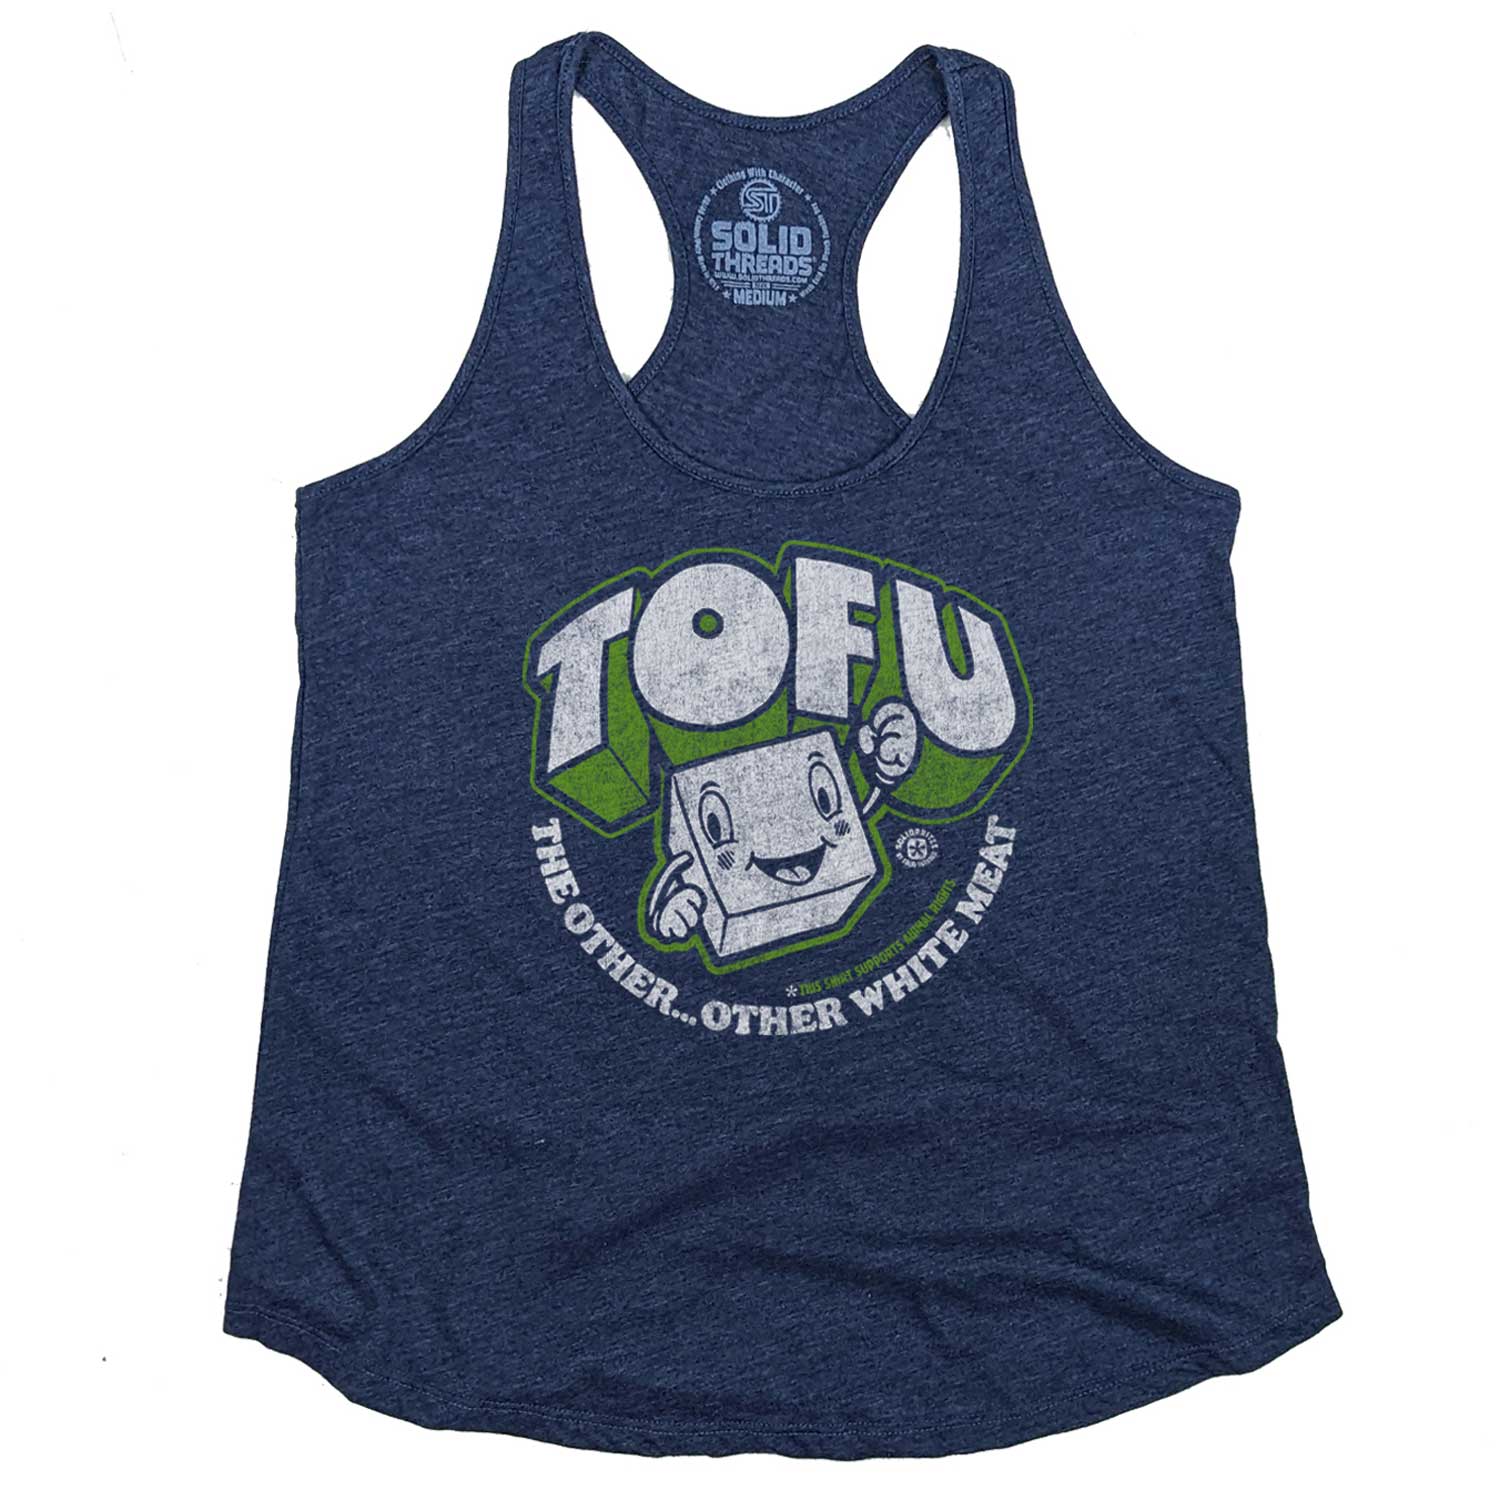 Women's Tofu, The Other Other White Meat Vintage Graphic Tank Top | Vegan T-shirt | Solid Threads